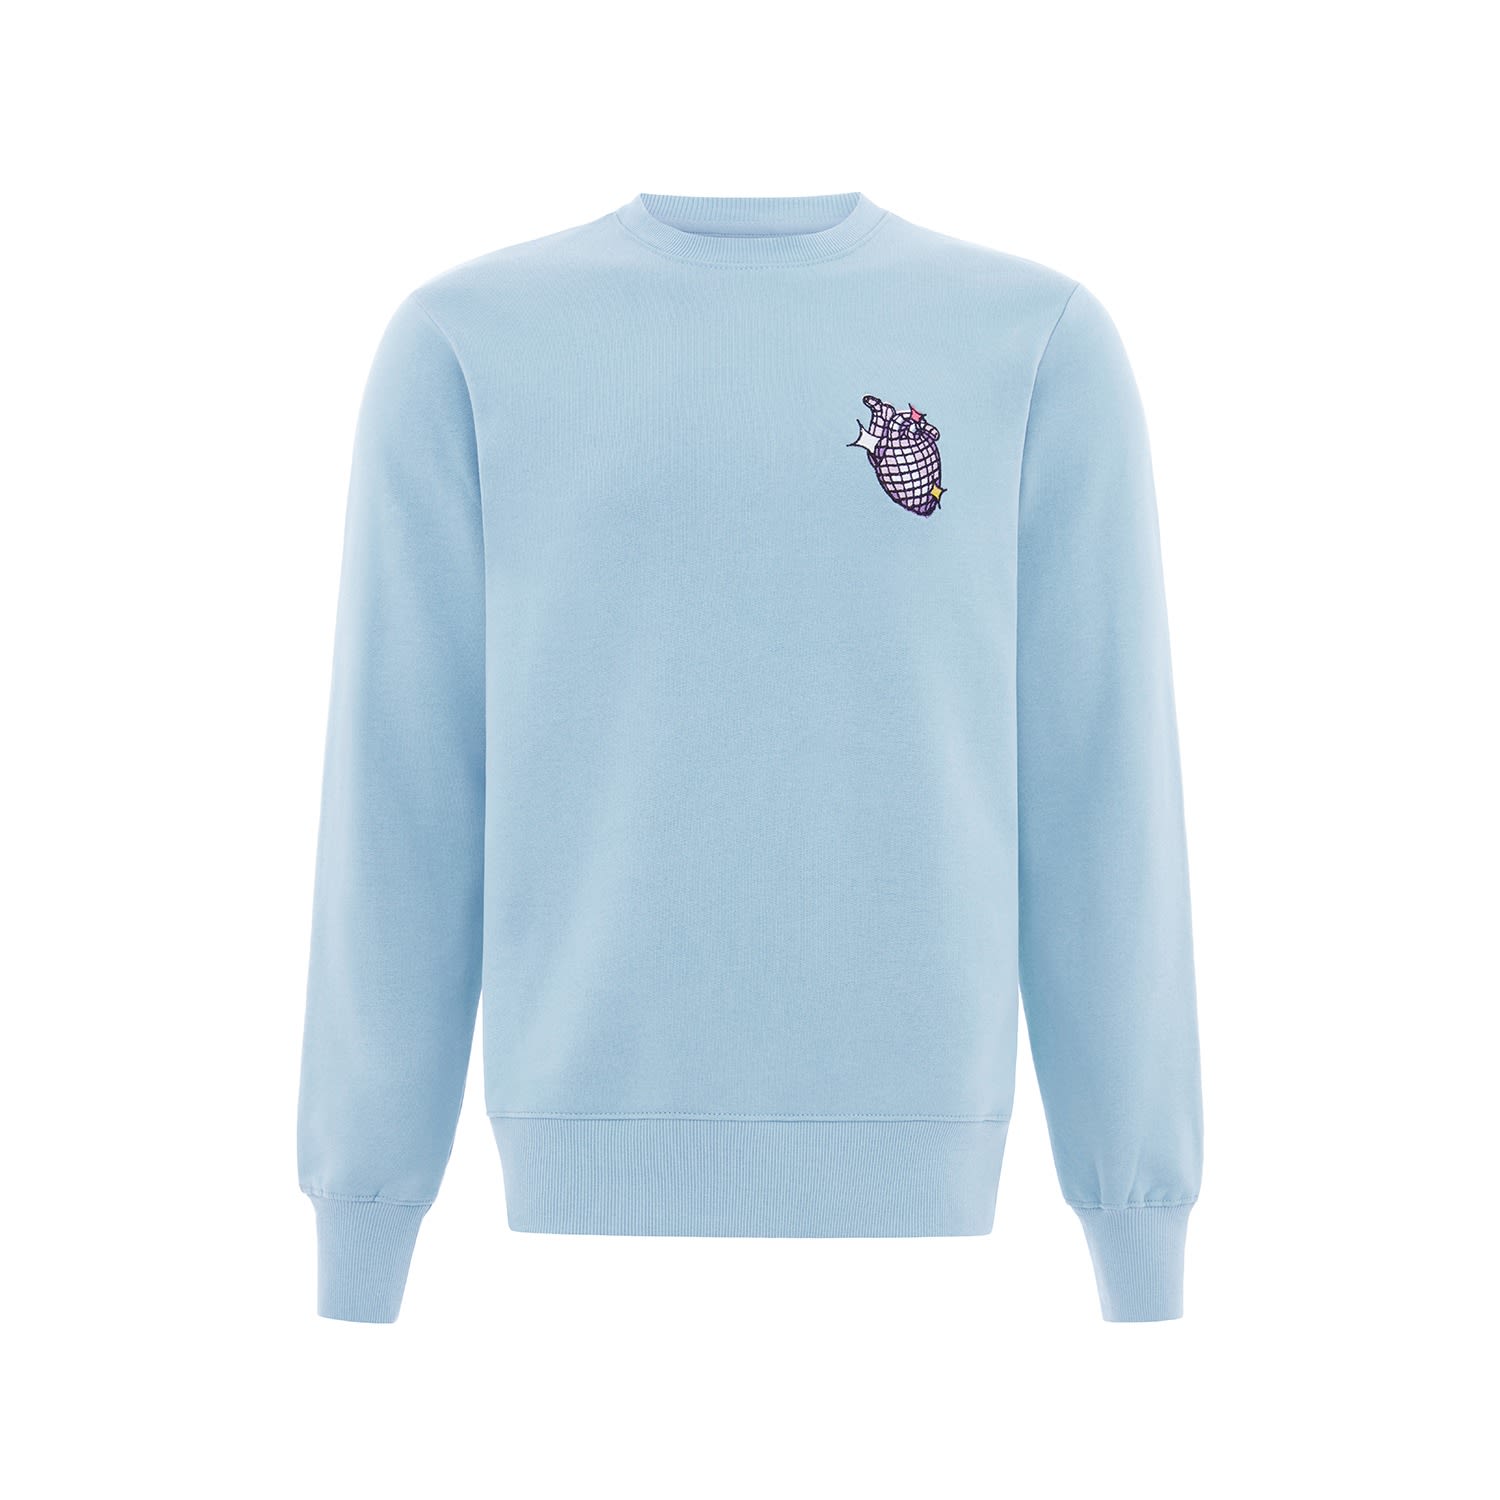 Dazzle Embroidered Organic Cotton Mens Sweatshirt In Light Blue Large blonde gone rogue